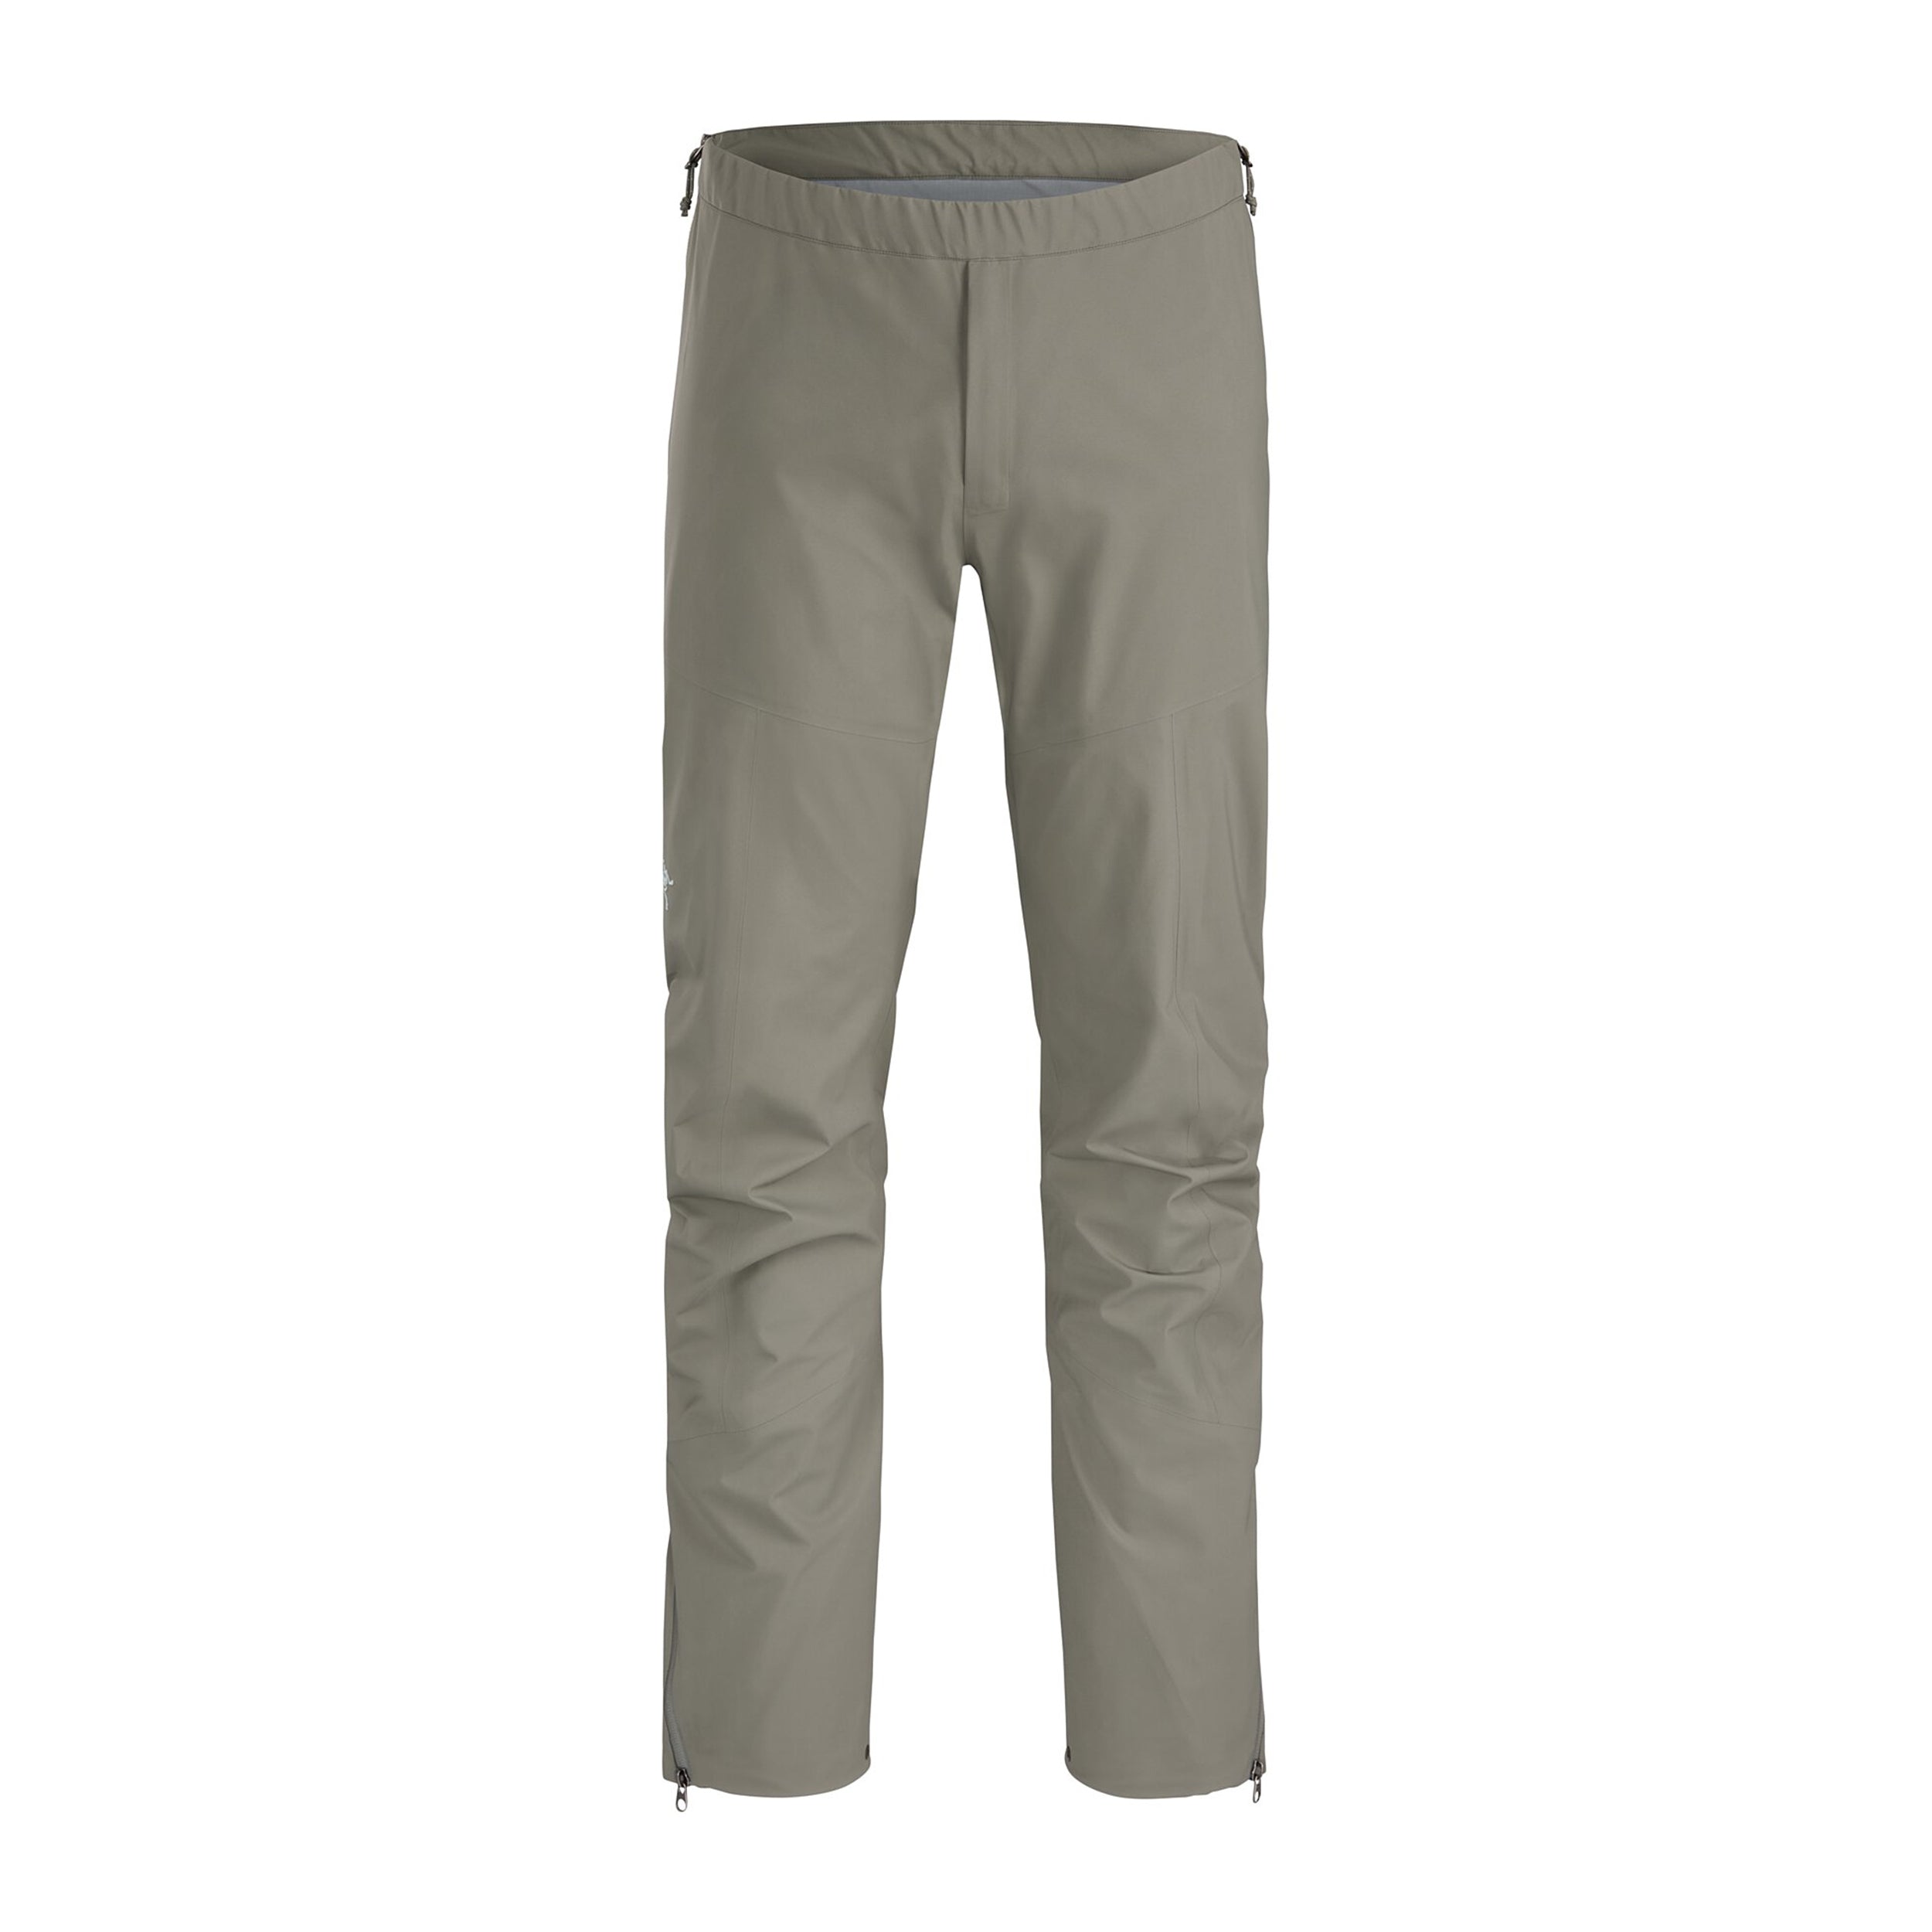 nike legend trainer gray and silver dress pants